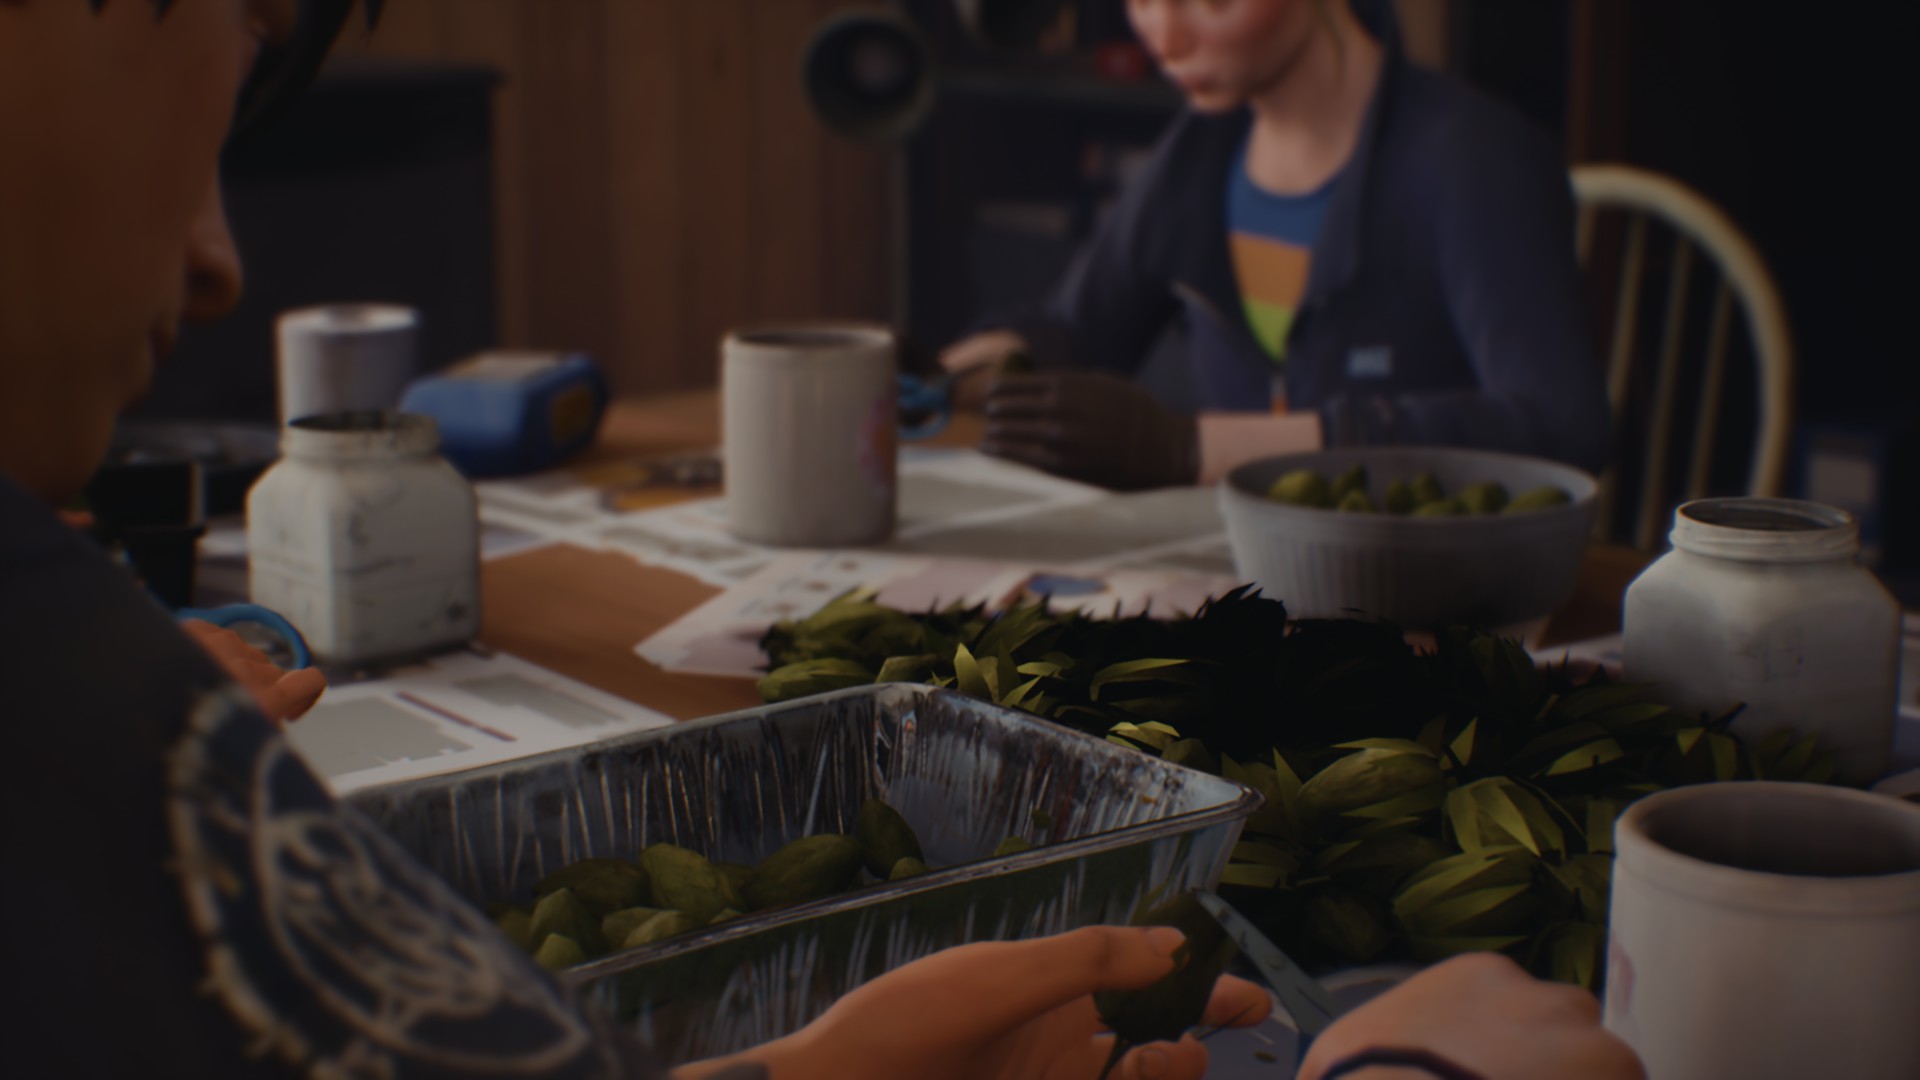 Life is Strange 2  Review – Pizza Fria